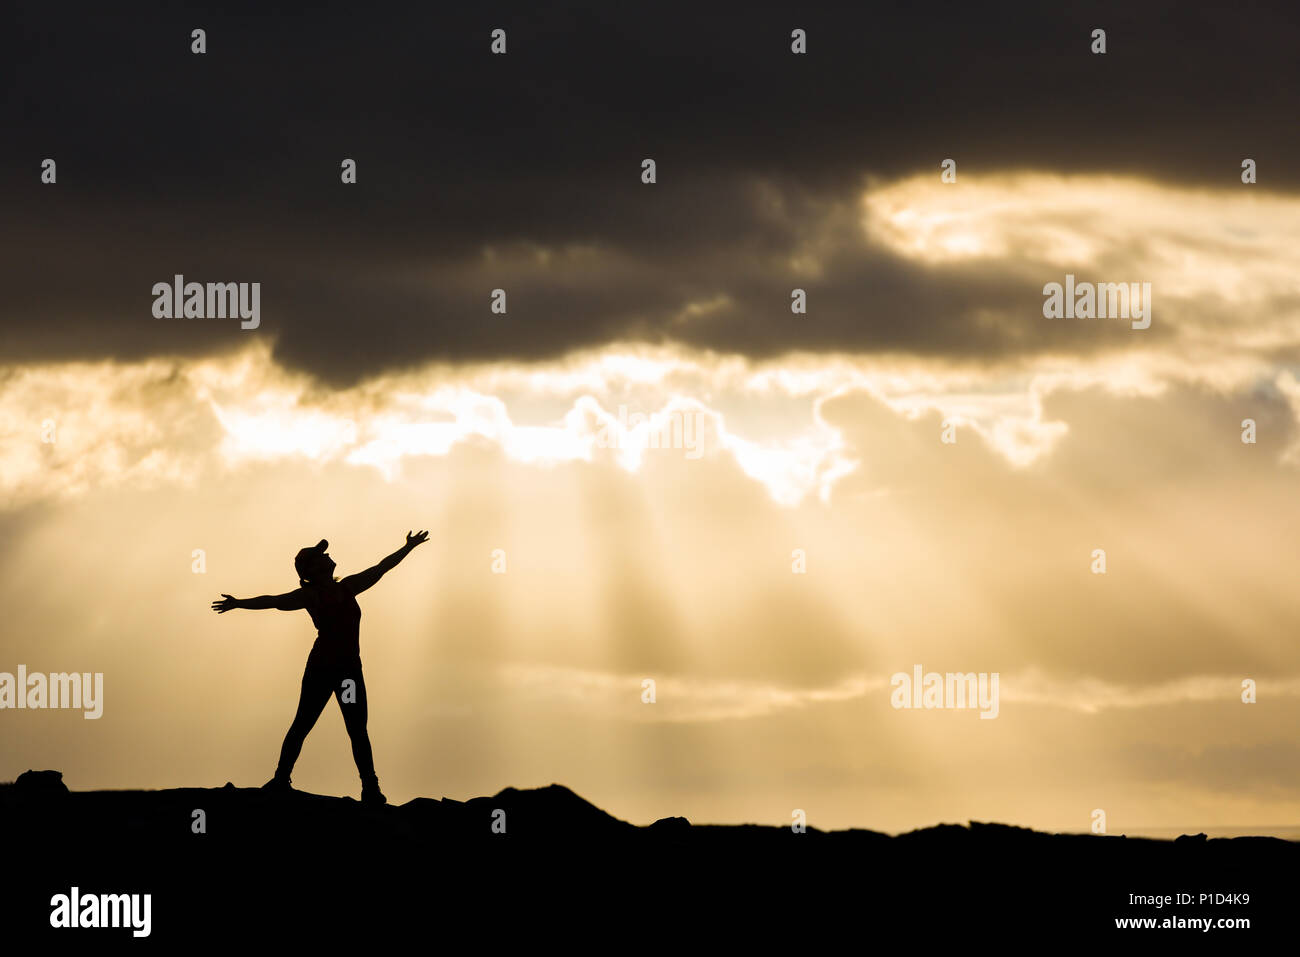 Woman enjoying the great outdoors looking toward the sky during a dramatic sunset. Stock Photo